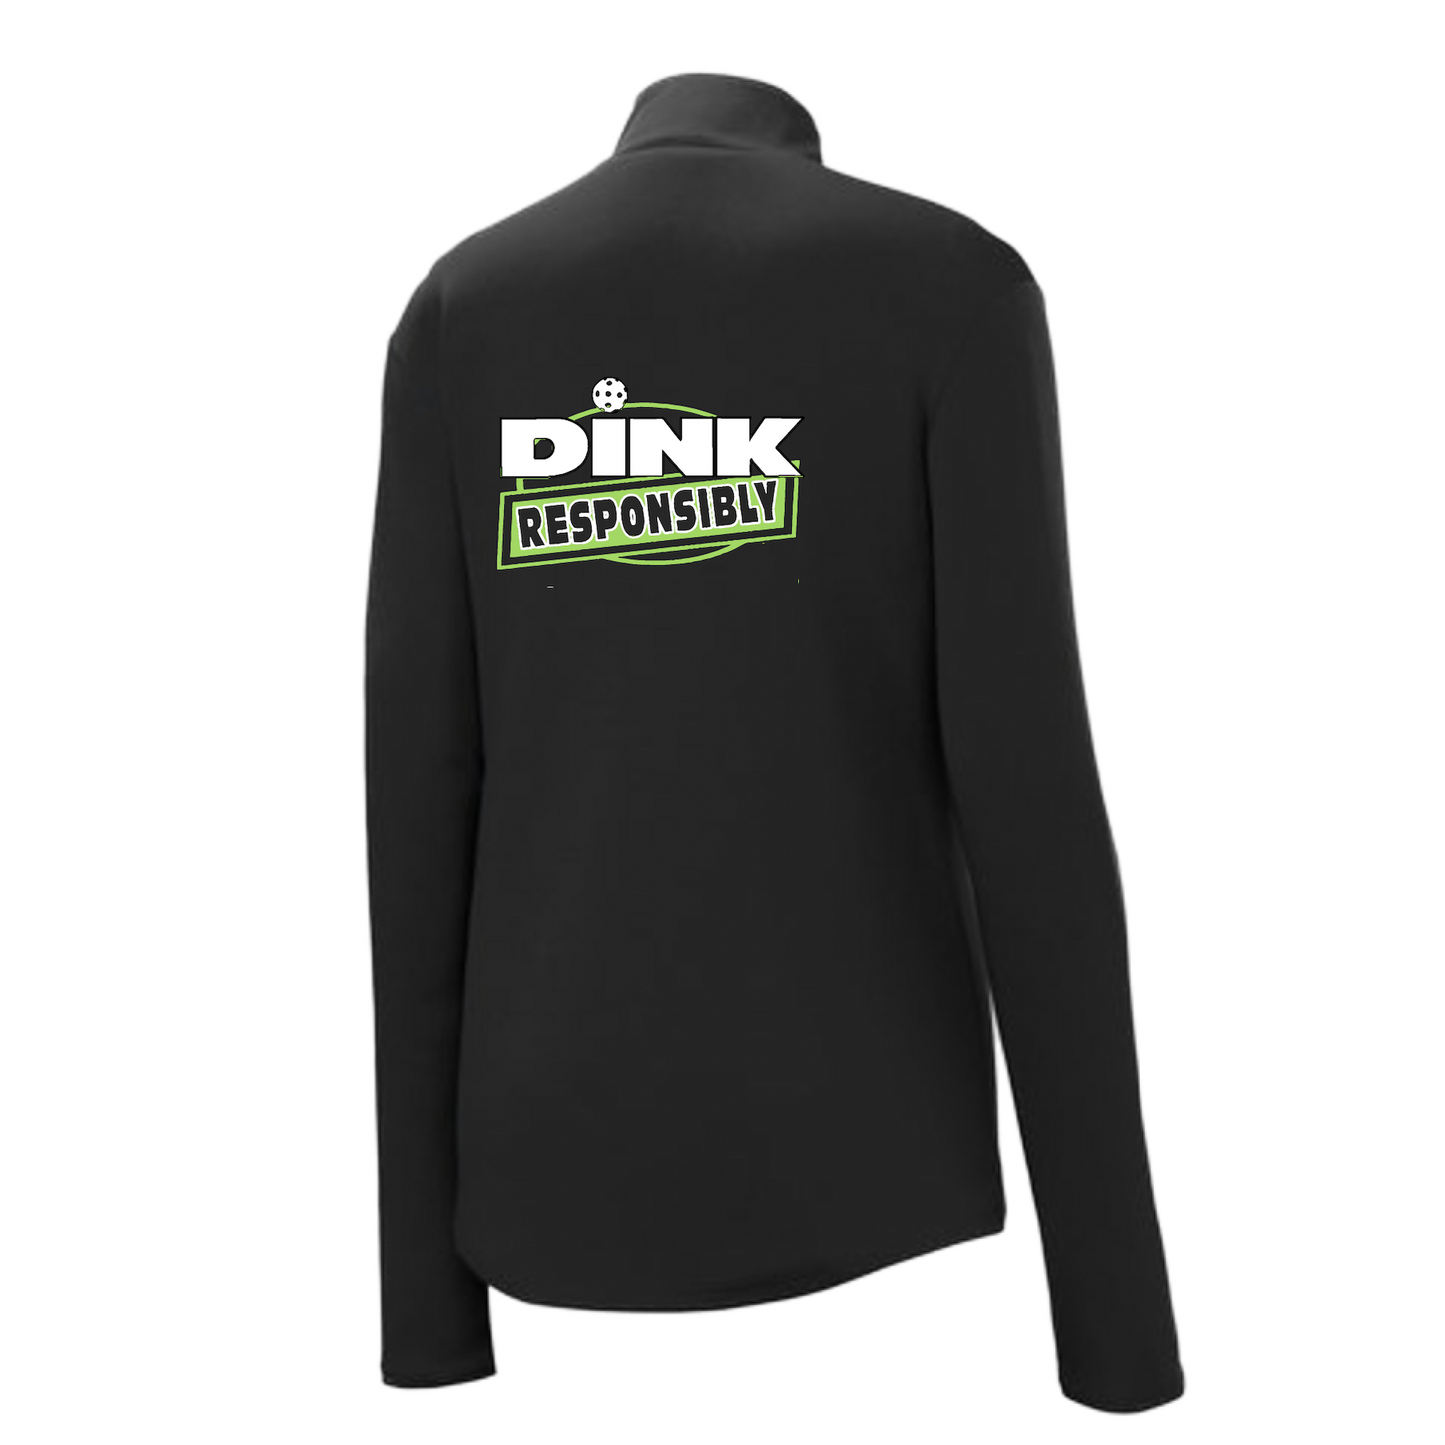 Pickleball Design: Dink Responsibly - Don't Get Smashed  Women's 1/4-Zip Pullover: Princess seams and Drop tail hem.  Turn up the volume in this Women's shirt with its perfect mix of softness and attitude. Material is ultra-comfortable with moisture wicking properties and tri-blend softness. PosiCharge technology locks in color. Highly breathable and lightweight. Versatile enough for wearing year-round.